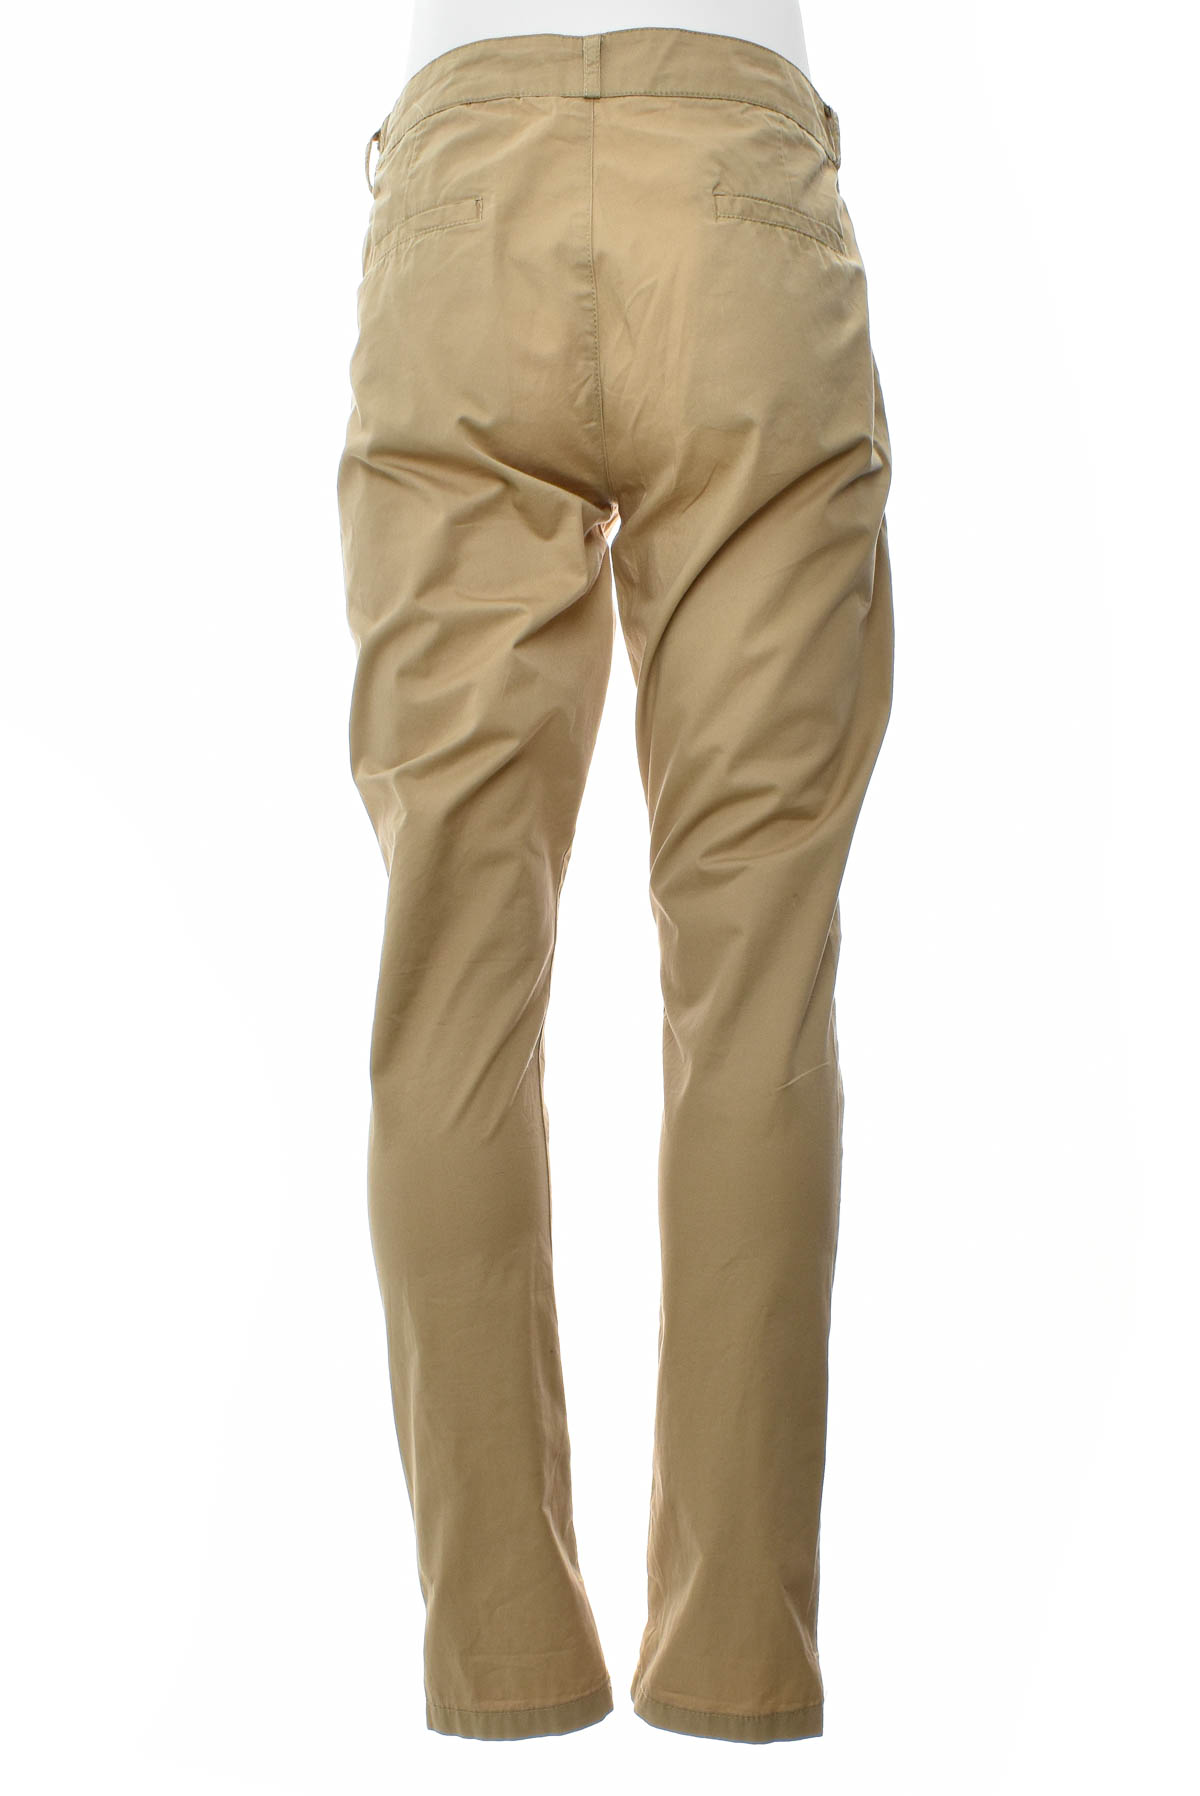 Trousers for boy - H&M - 1